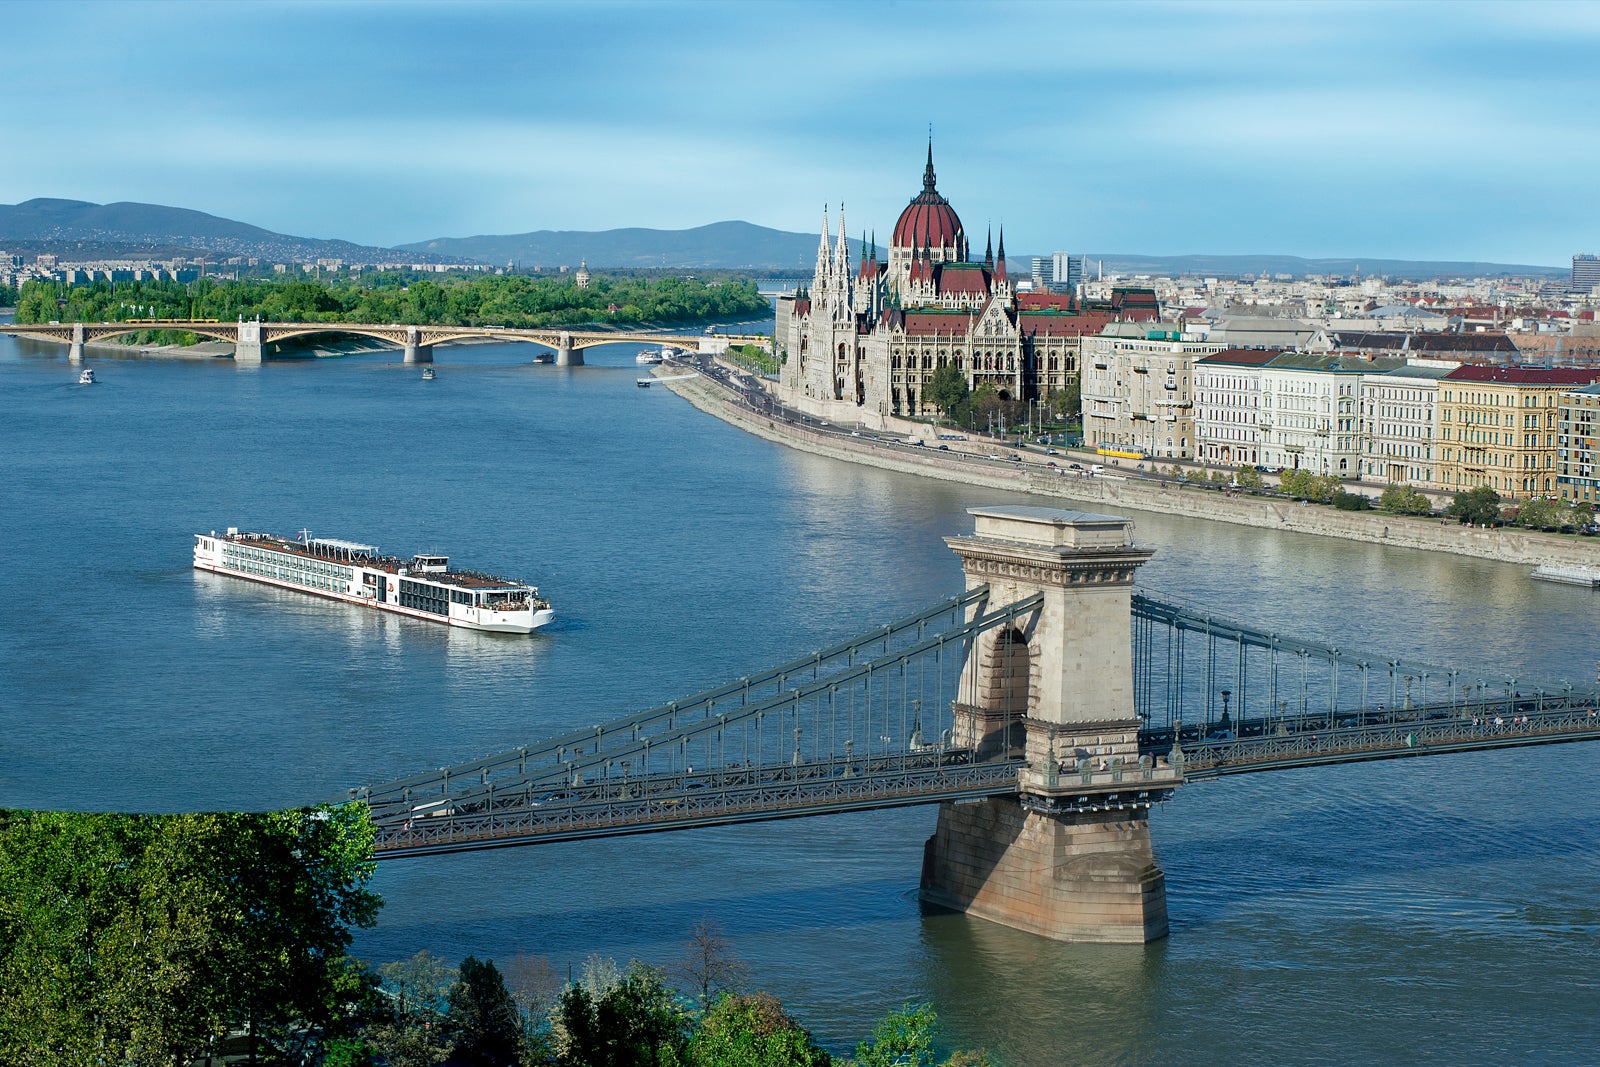 where does the viking cruise ship dock in budapest